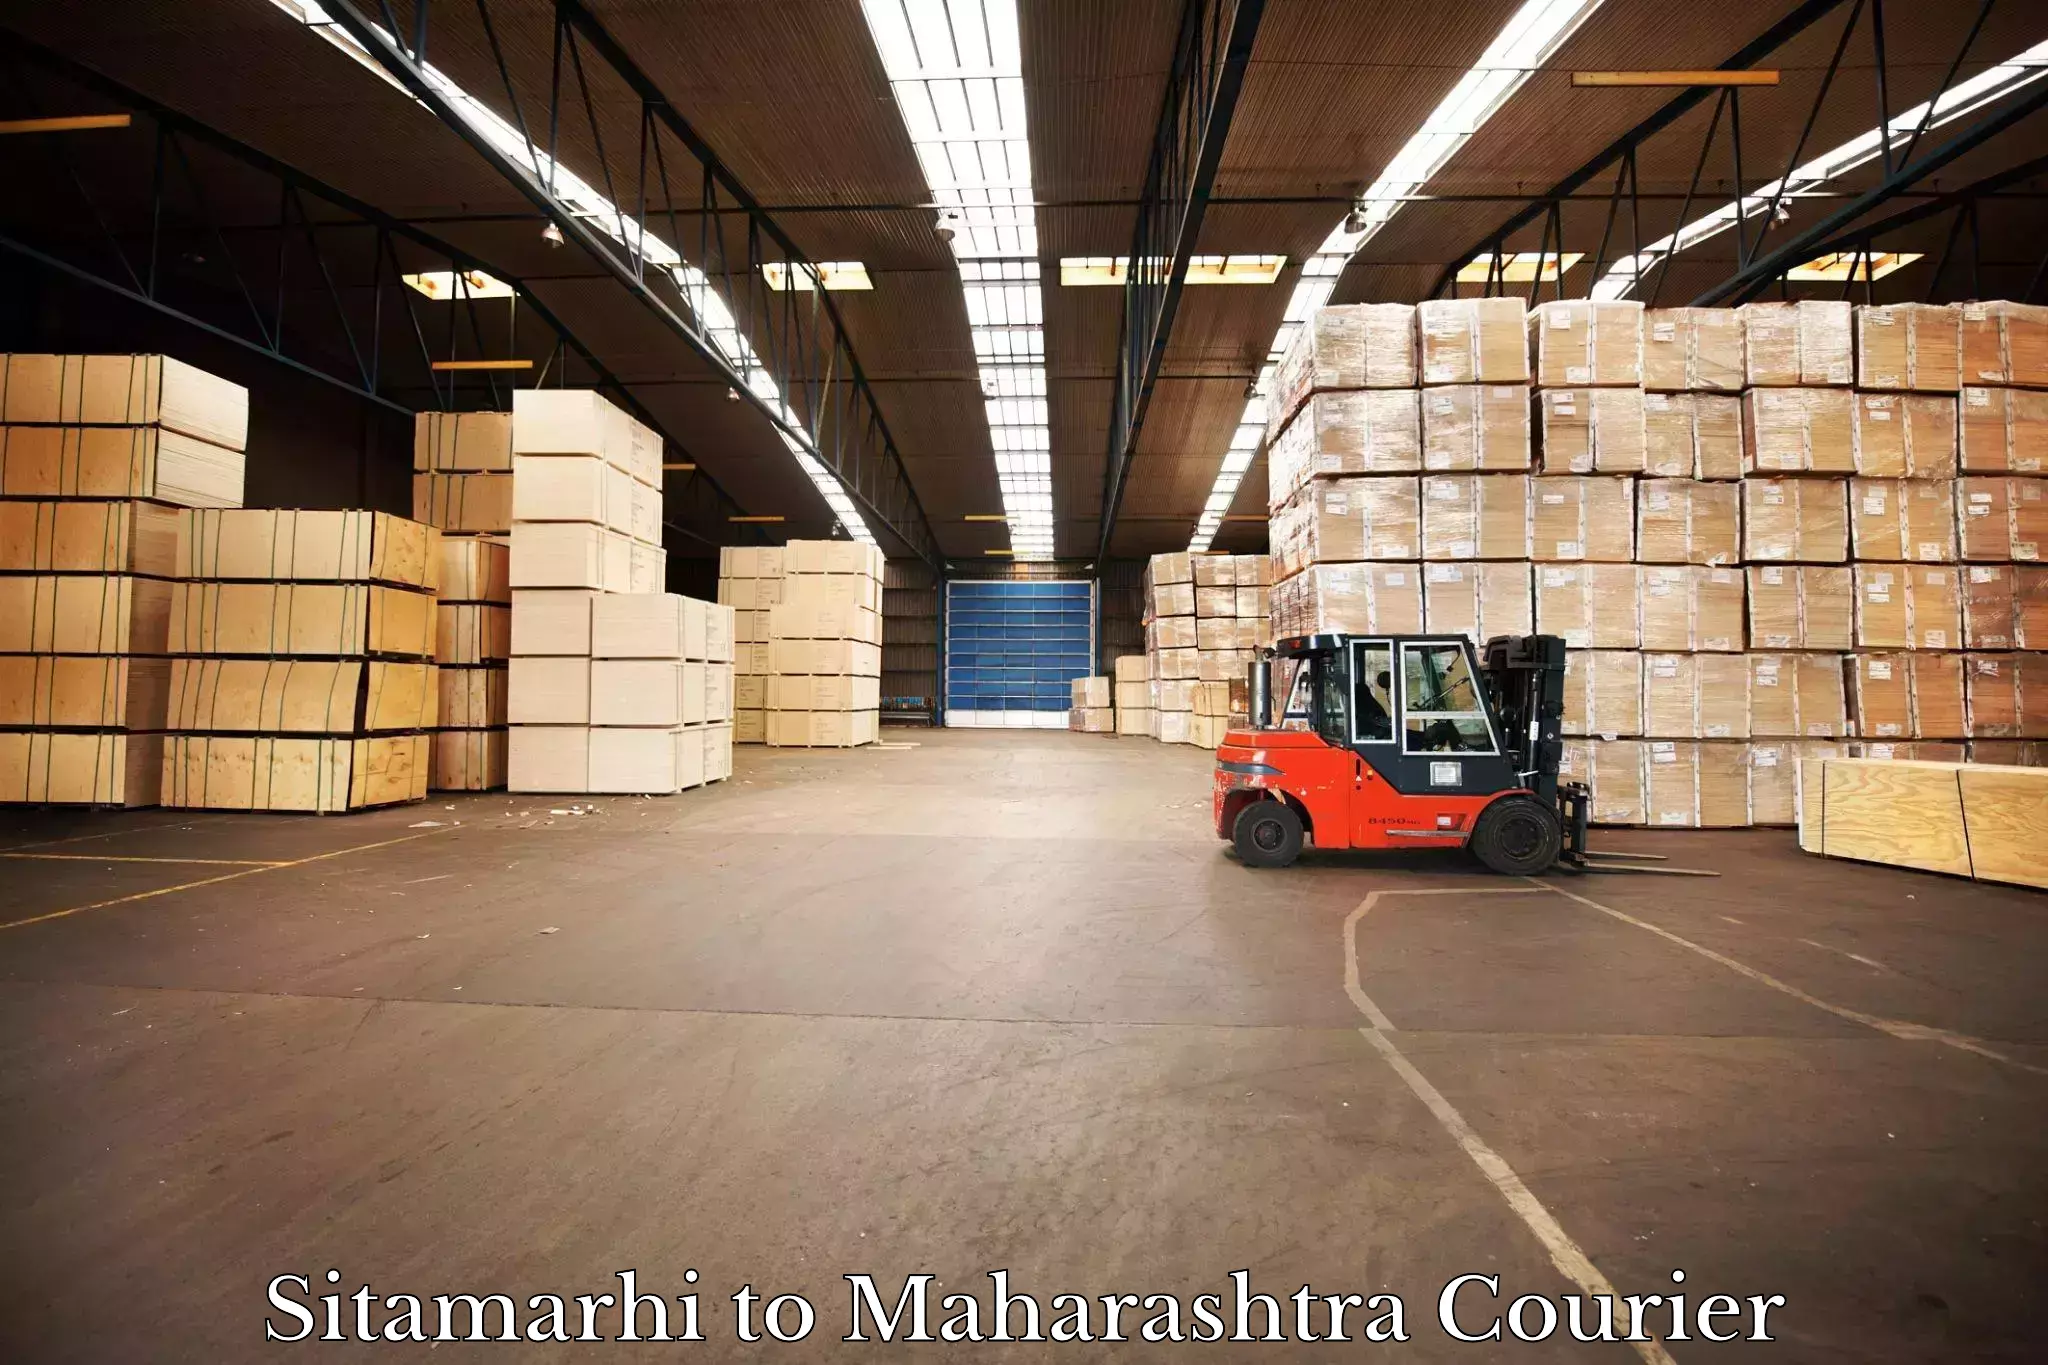 State-of-the-art courier technology Sitamarhi to Maharashtra